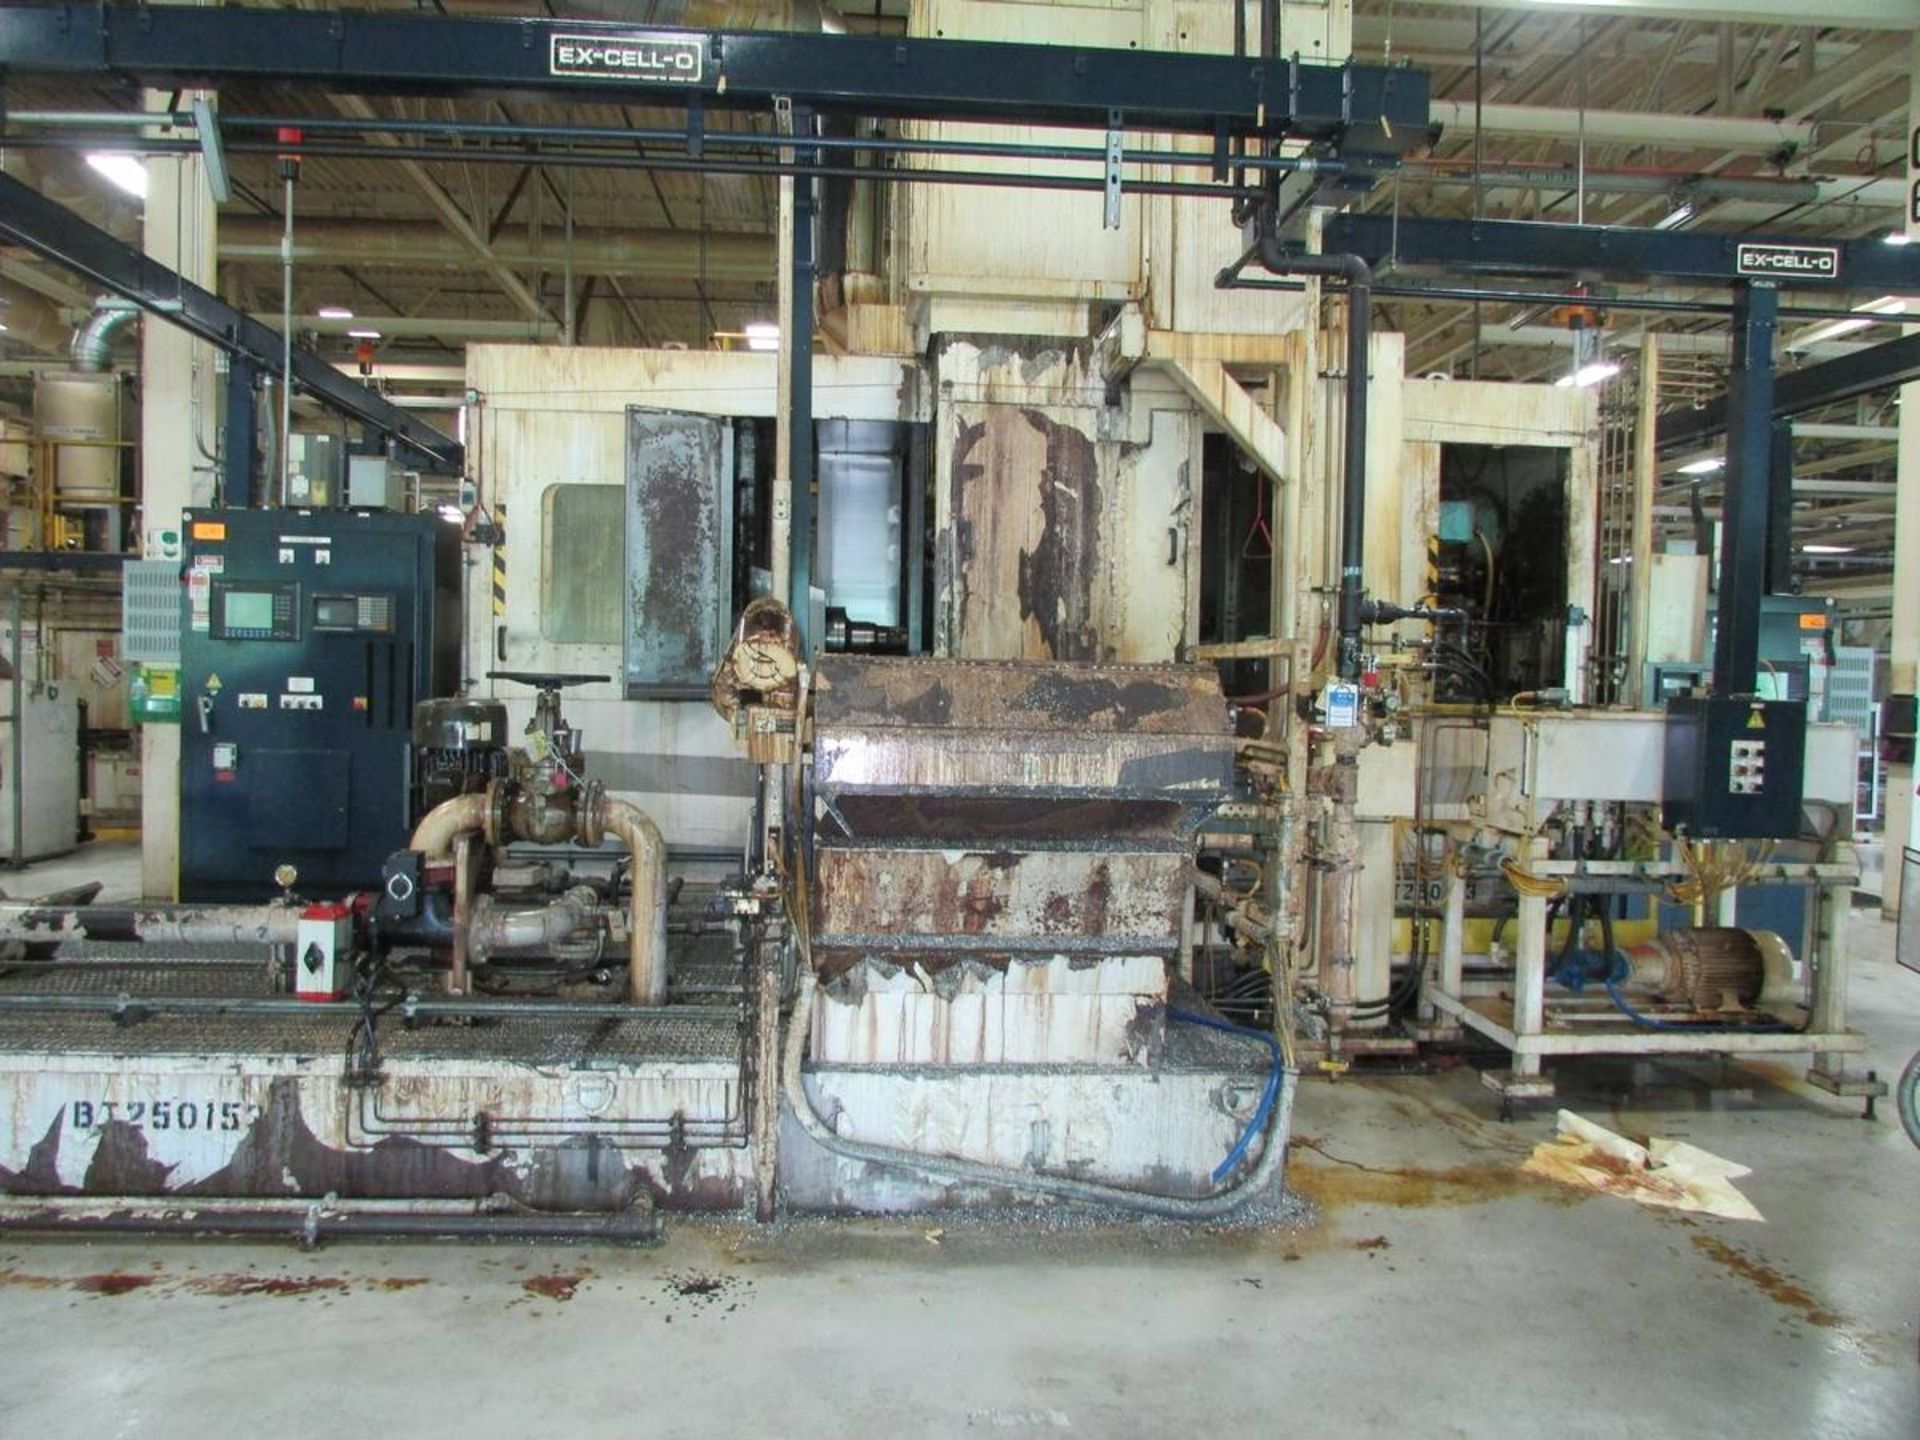 Ex-Cello 4-Spindle Horizontal CNC Boring Mill - Image 15 of 54